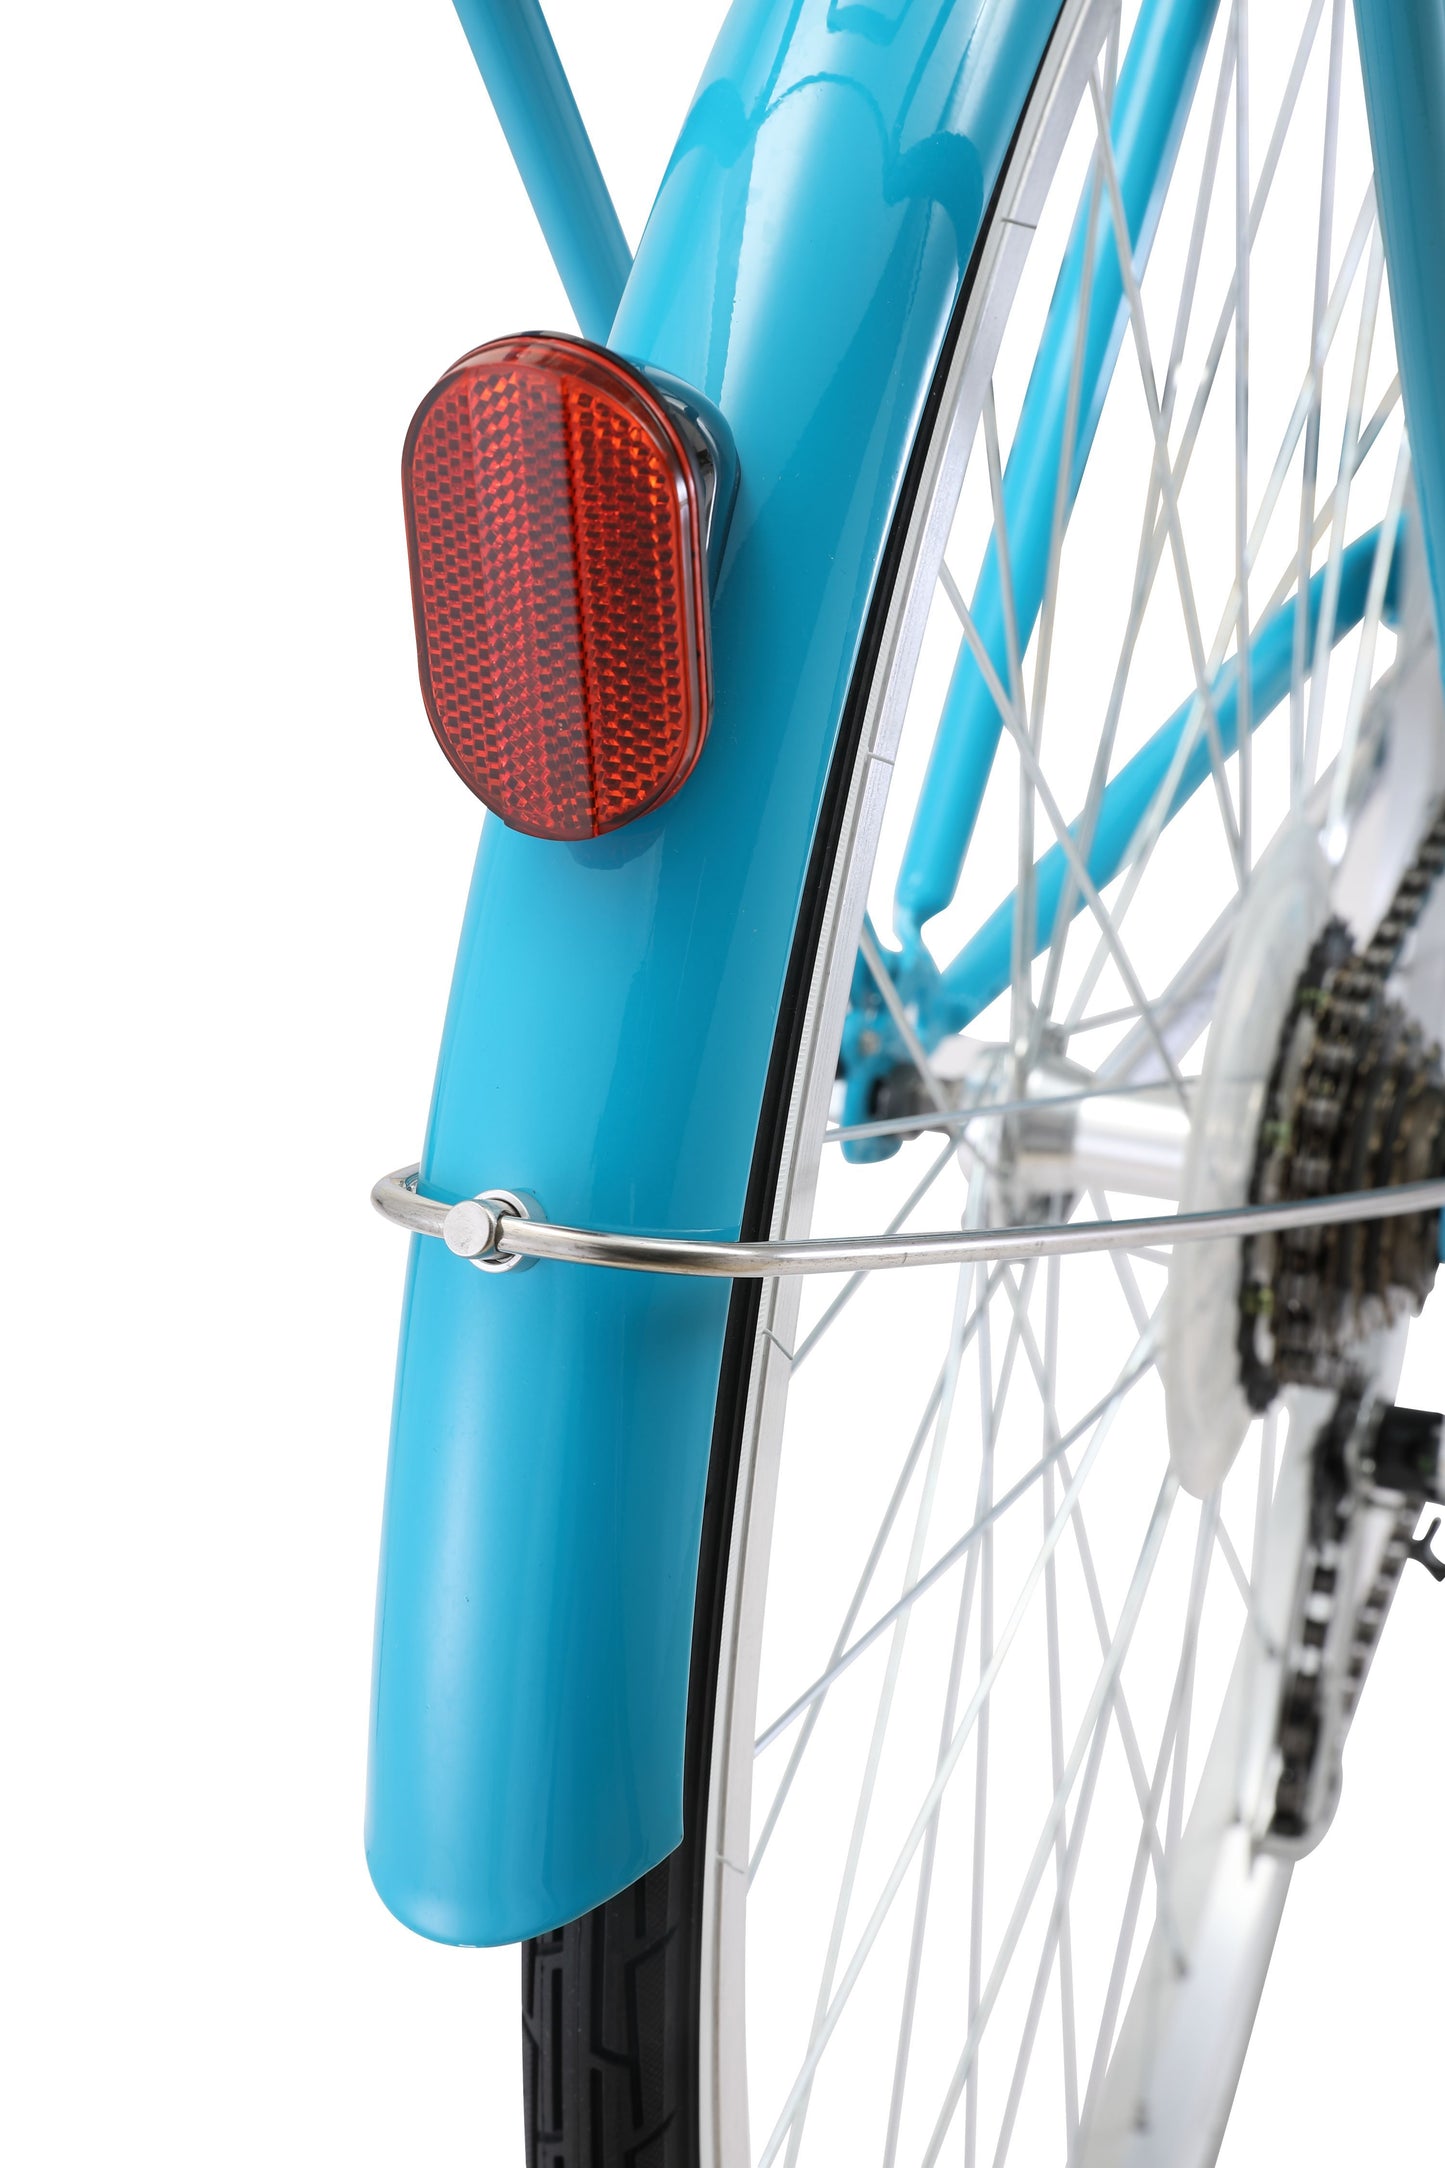 Ladies Classic Plus Vintage Bike in aqua showing rear mudguard with red reflector from Reid Cycles Australia